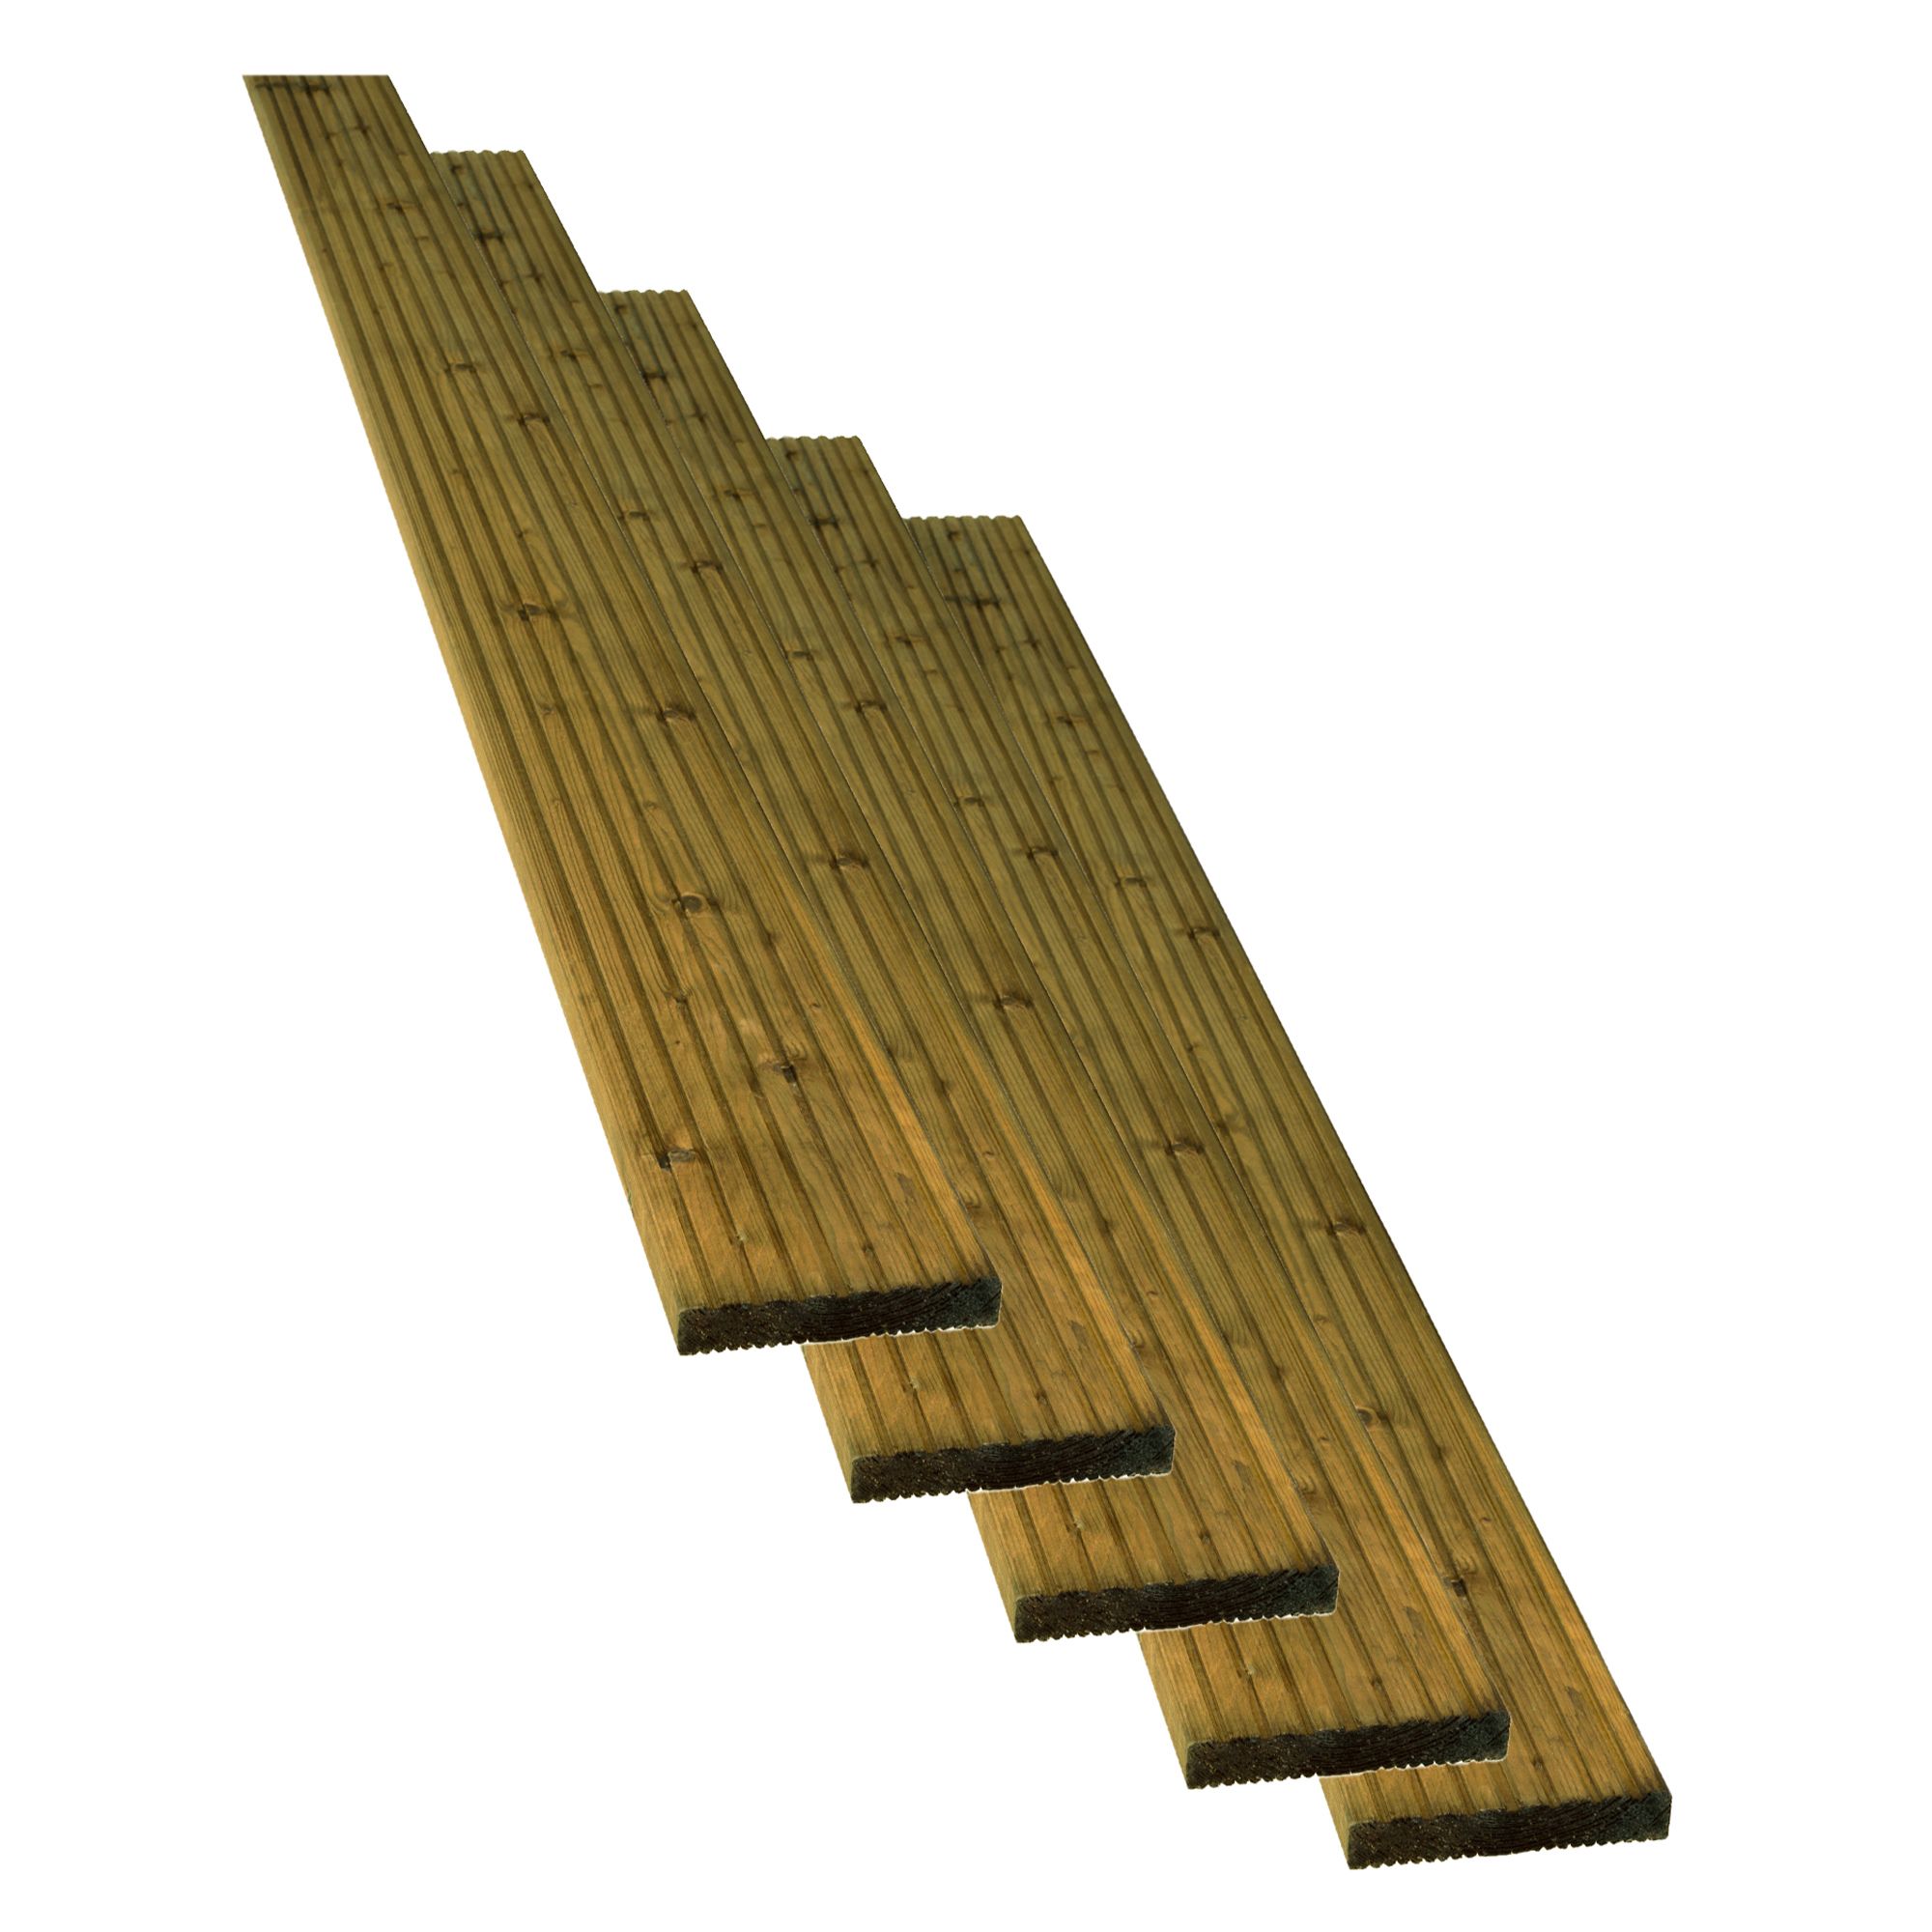 Blooma Nevou premium Softwood Deck board (L)2.4m (W)144mm (T)27mm, Pack of 5